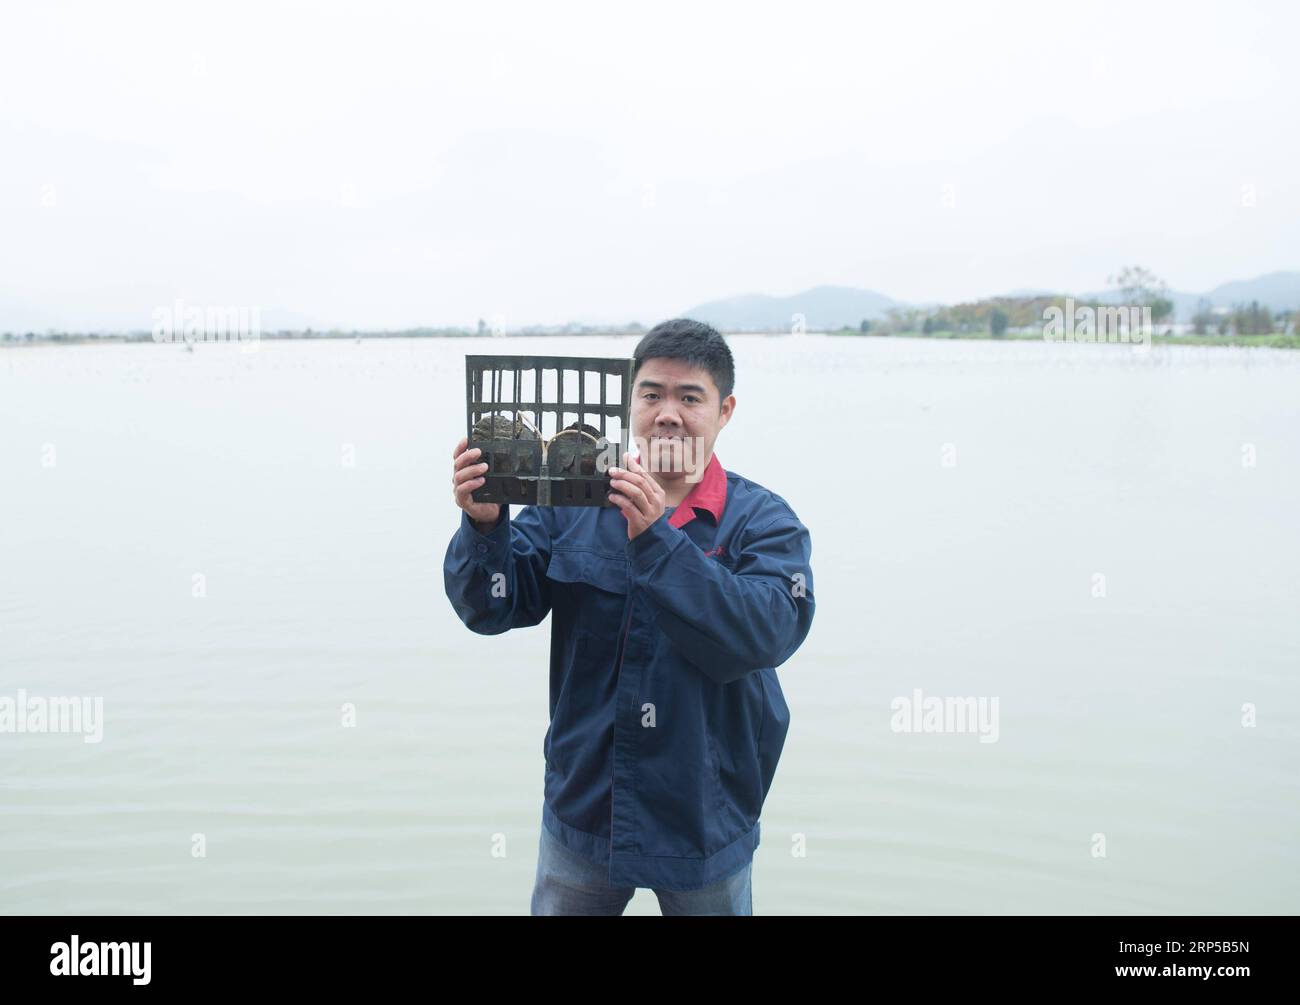 (181207) -- ZHUJI, Dec. 7, 2018 -- A worker shows pearl oysters receiving targeted feeding in Shanxiahu Village of Shanxiahu Town, Zhuji City of east China s Zhejiang Province, Dec. 6, 2018. Pearl industry in Zhuji has upgraded its development mode from polluted water cultivation to clean water cultivation through ways such as combination cultivation of fishes and oysters, tail water treatment. There are nowadays about 4,200 Mu (about 280 hectares) of pearls cultivated in Shanxiahu Town. ) (zwx) CHINA-ZHEJIANG-ZHUJI-PEARL INDUSTRY (CN) WengxXinyang PUBLICATIONxNOTxINxCHN Stock Photo